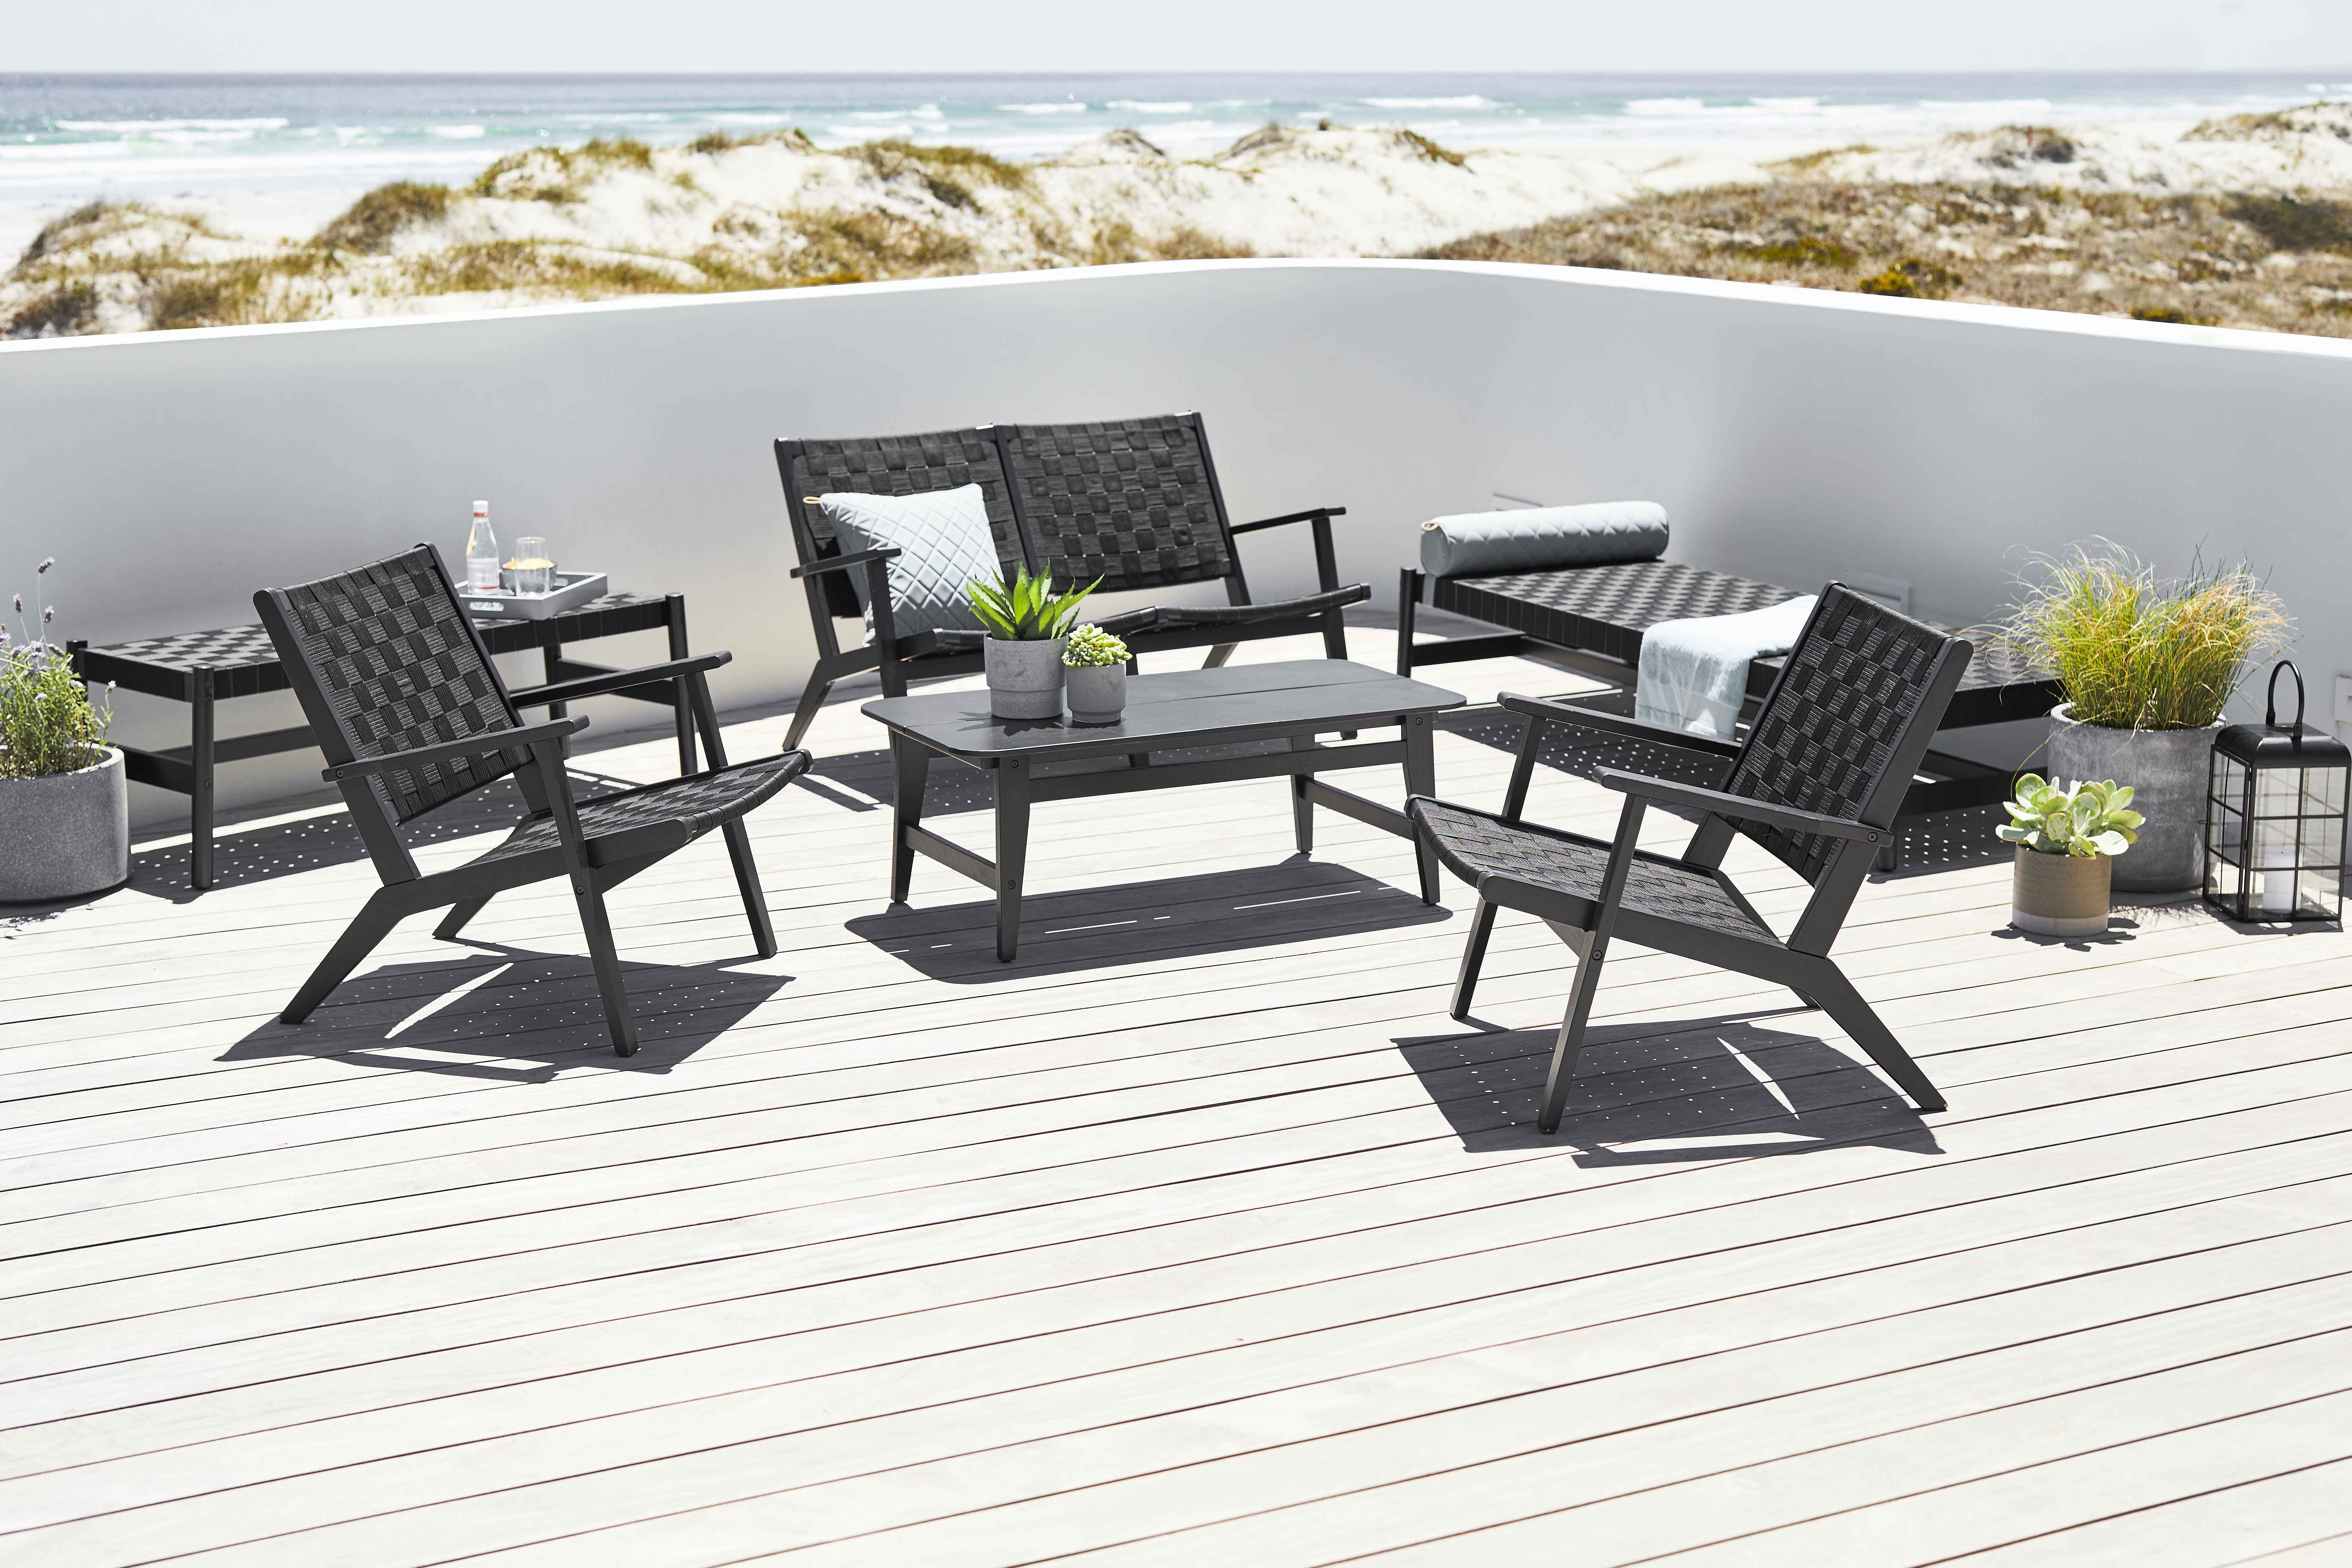 Outdoor Living From Jysk Elevate Pr for size 6659 X 4439